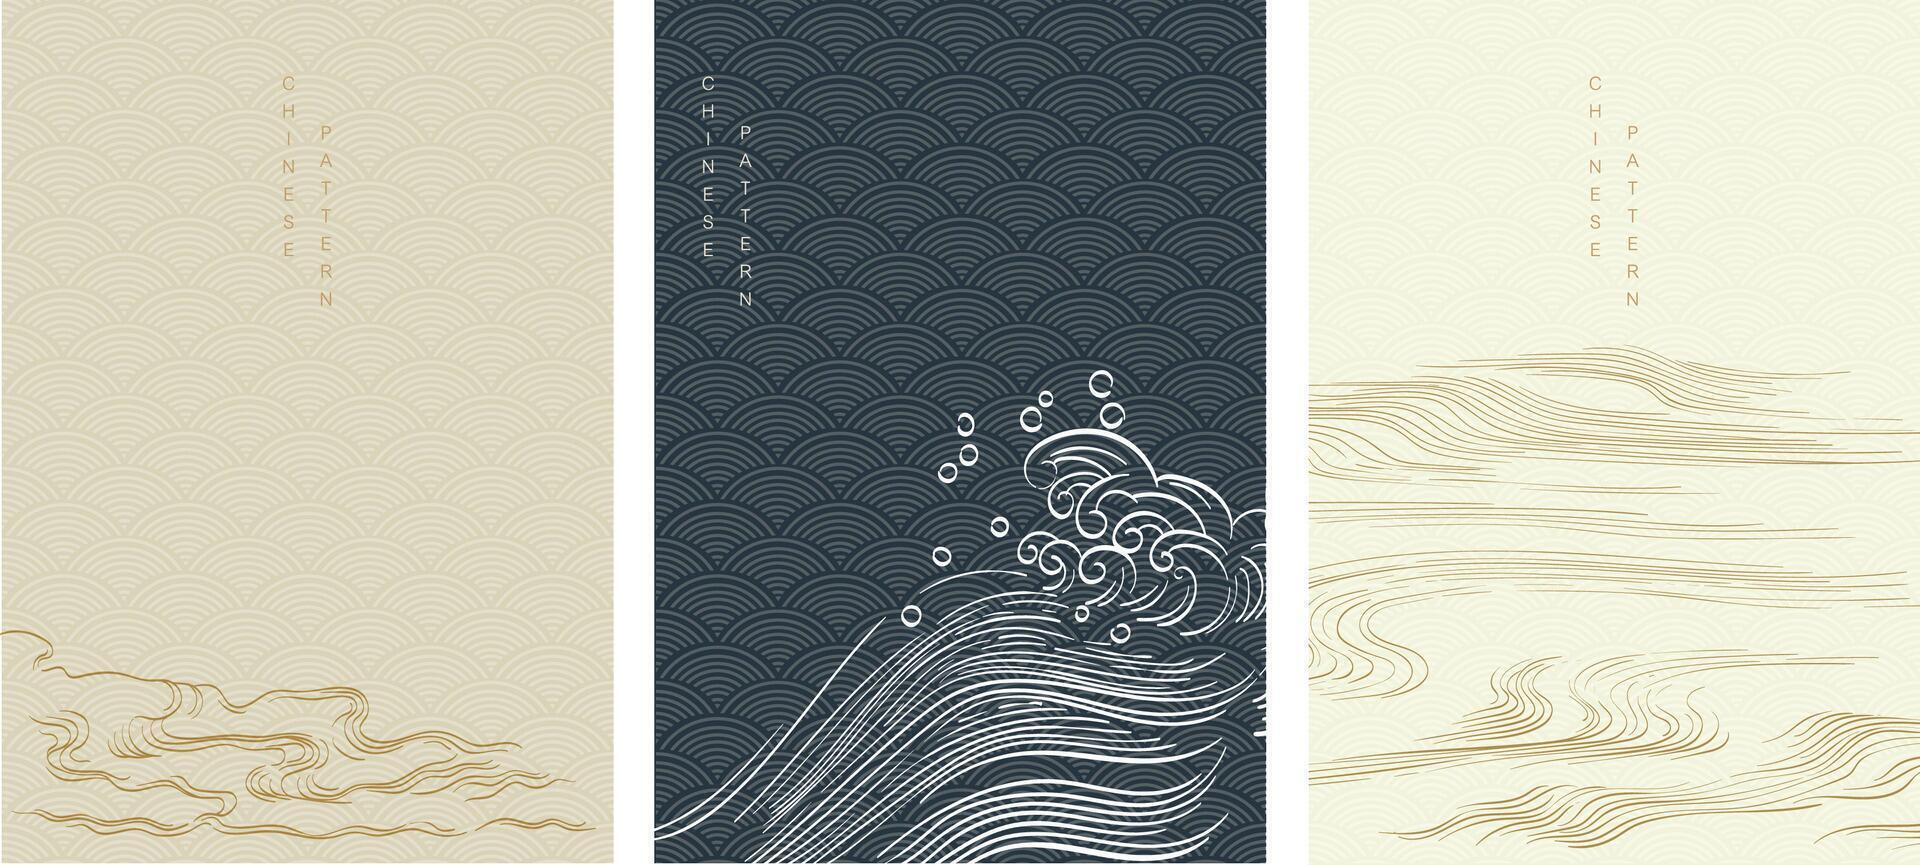 Abstract landscape with Japanese wave pattern vector. Nature art background with Chinese wave and cloud template in oriental style. Hand drawn line elements vector